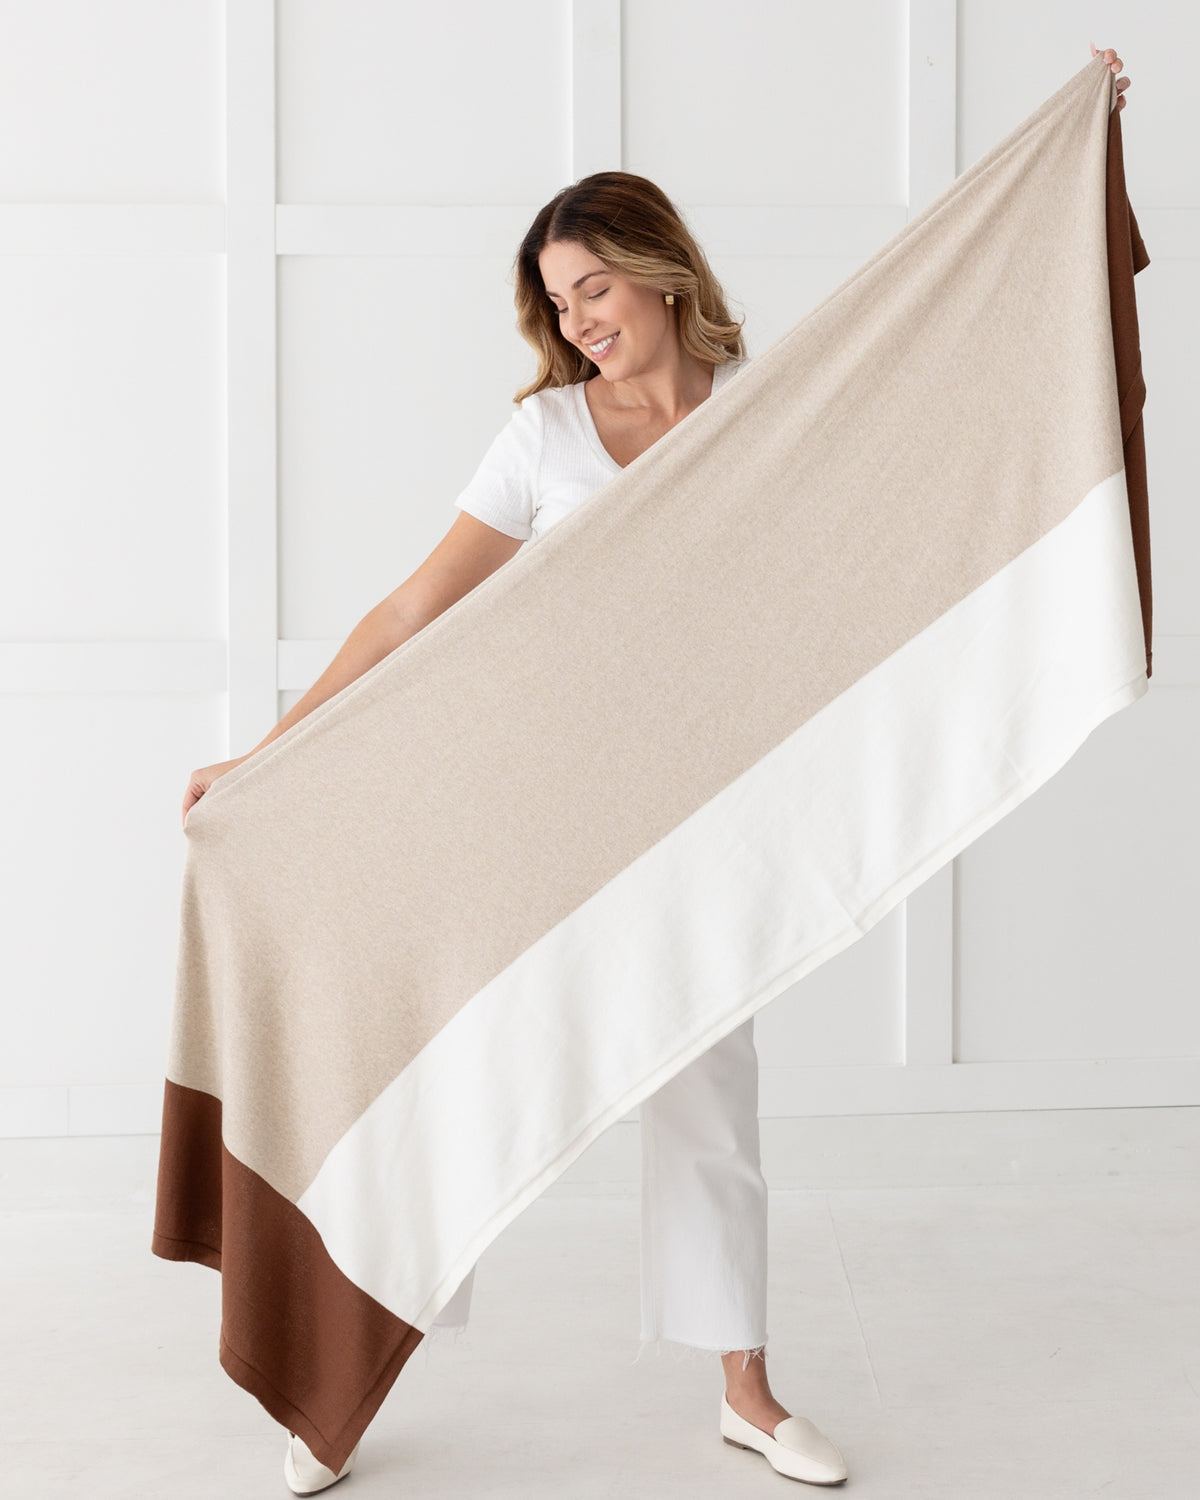 The Dreamsoft Travel Scarf - Canyon Brown Colorblock